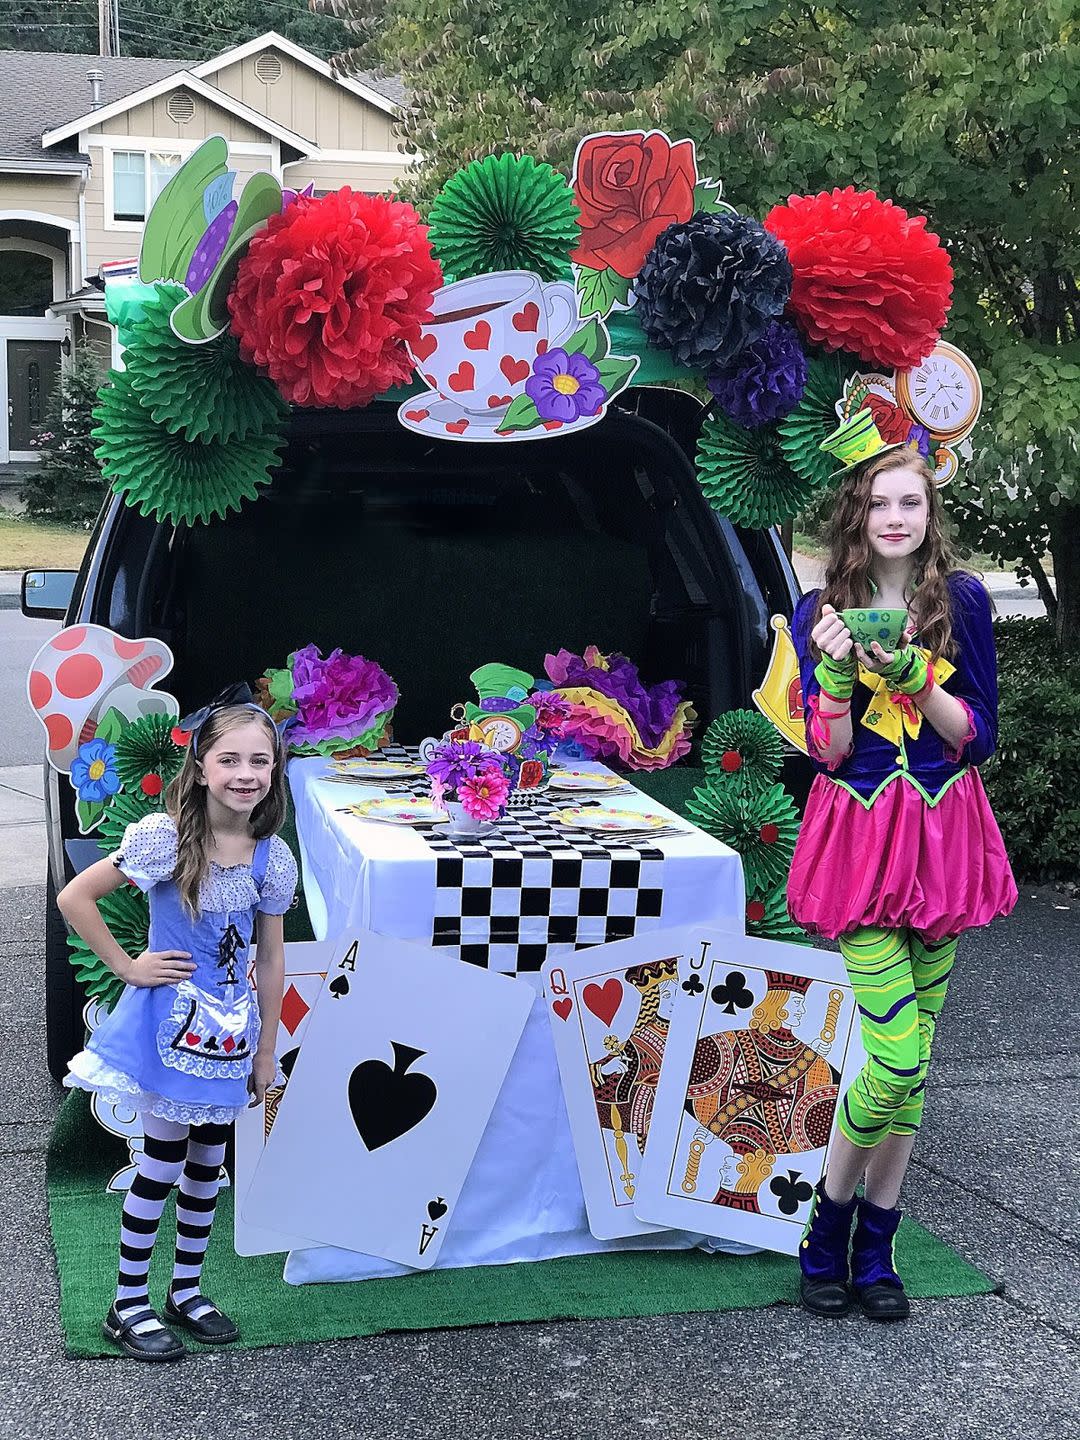 little girl dressesdas alice in wonderland in a blue pinafore dress with black and white striped leggings and older girl dressed as the mad hatter in a purple and pink dress with green leggings standing beside a table in front of an open tailgate with oversized playing cards on the front, a black and white checked tablecloth and over the top of the vehicle are large paper flowers and cut outs of a pocket watch, top hat and tea cup with hearts on it